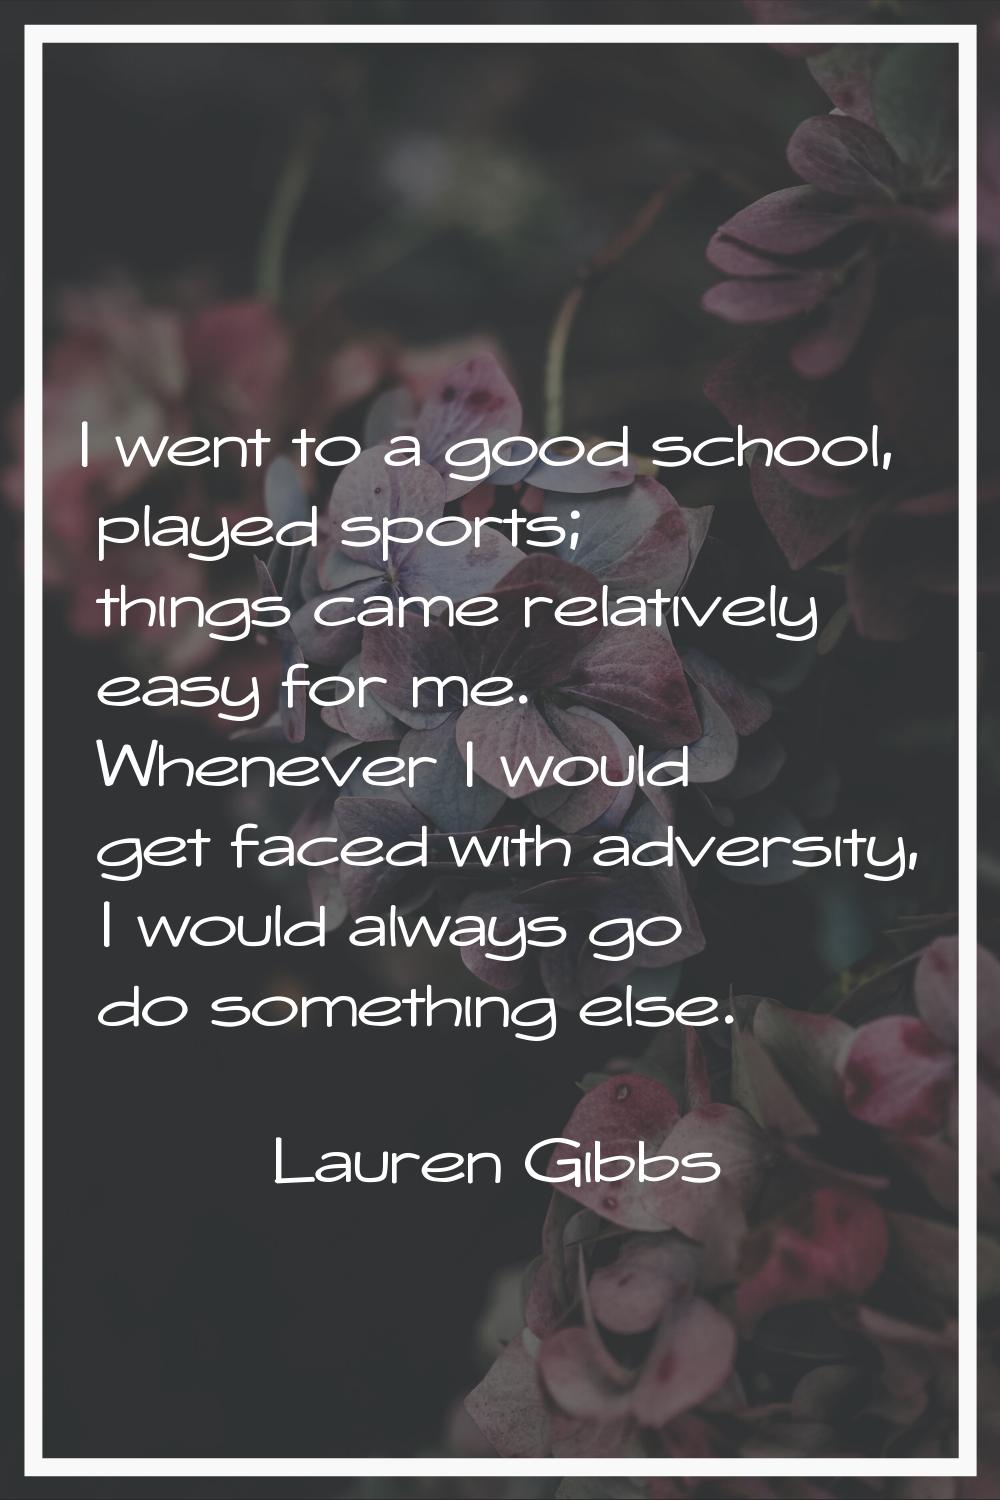 I went to a good school, played sports; things came relatively easy for me. Whenever I would get fa